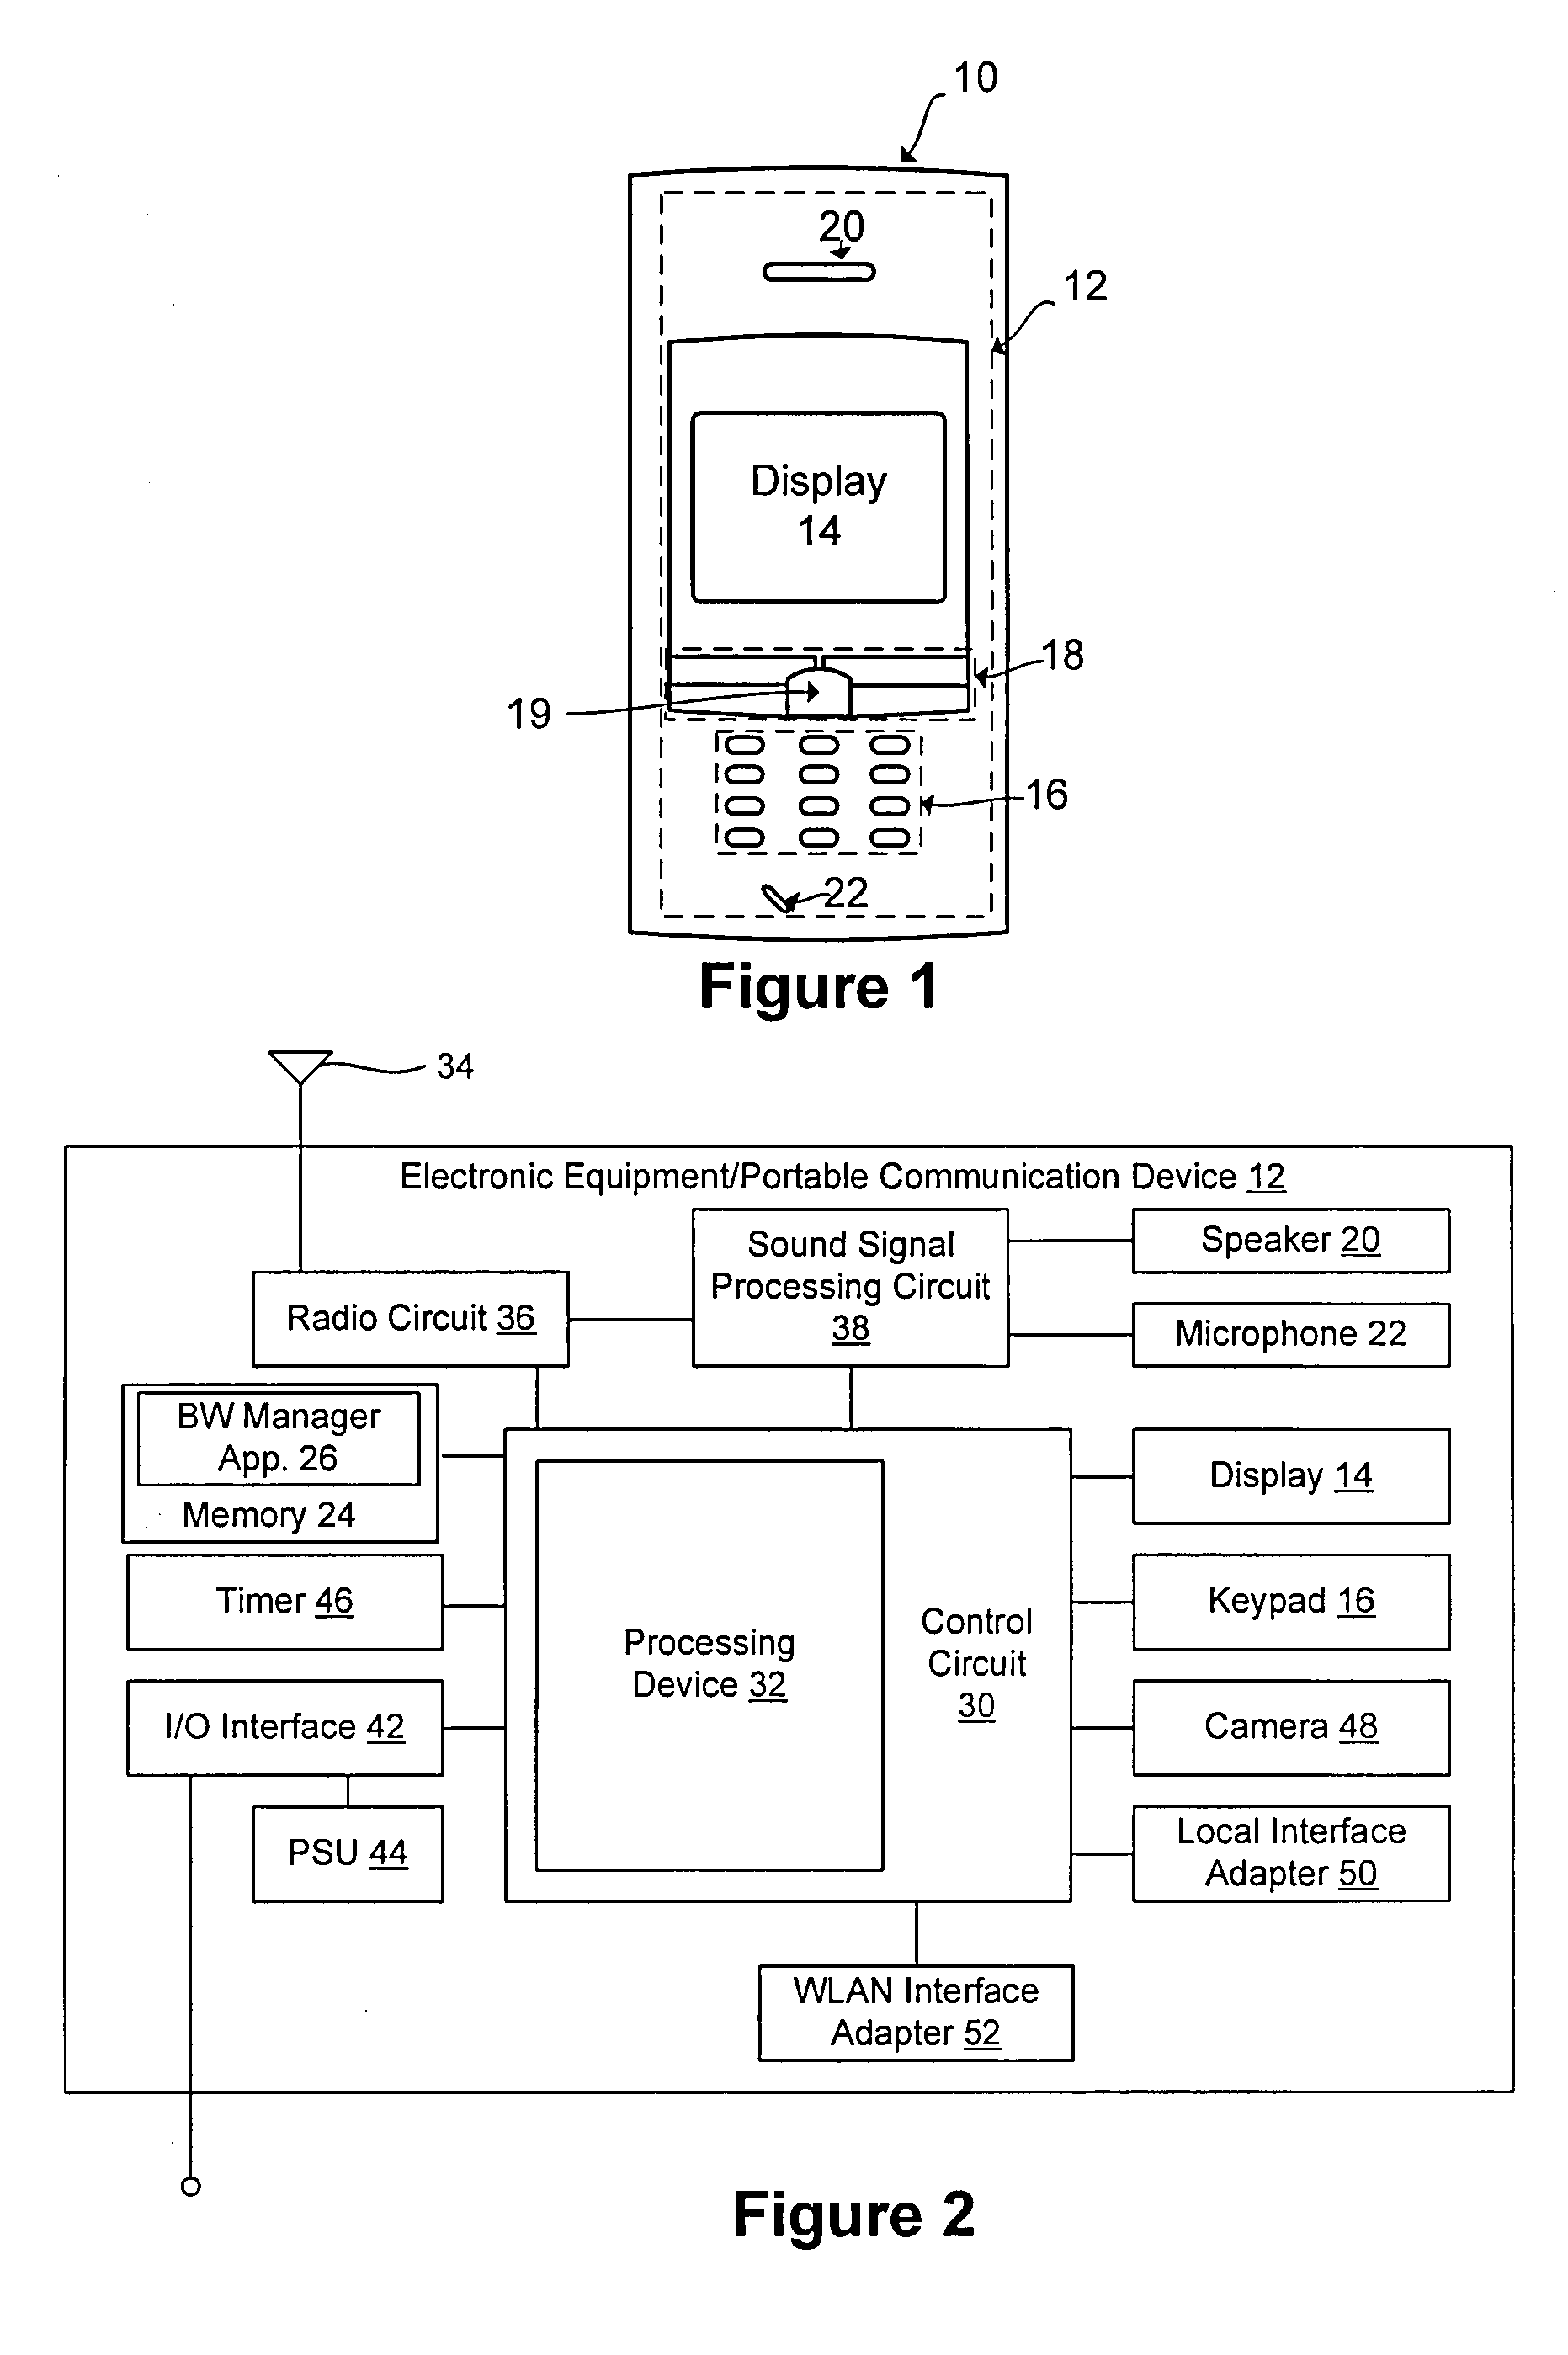 System and method for short range sharing of bandwidth between electronic equipment